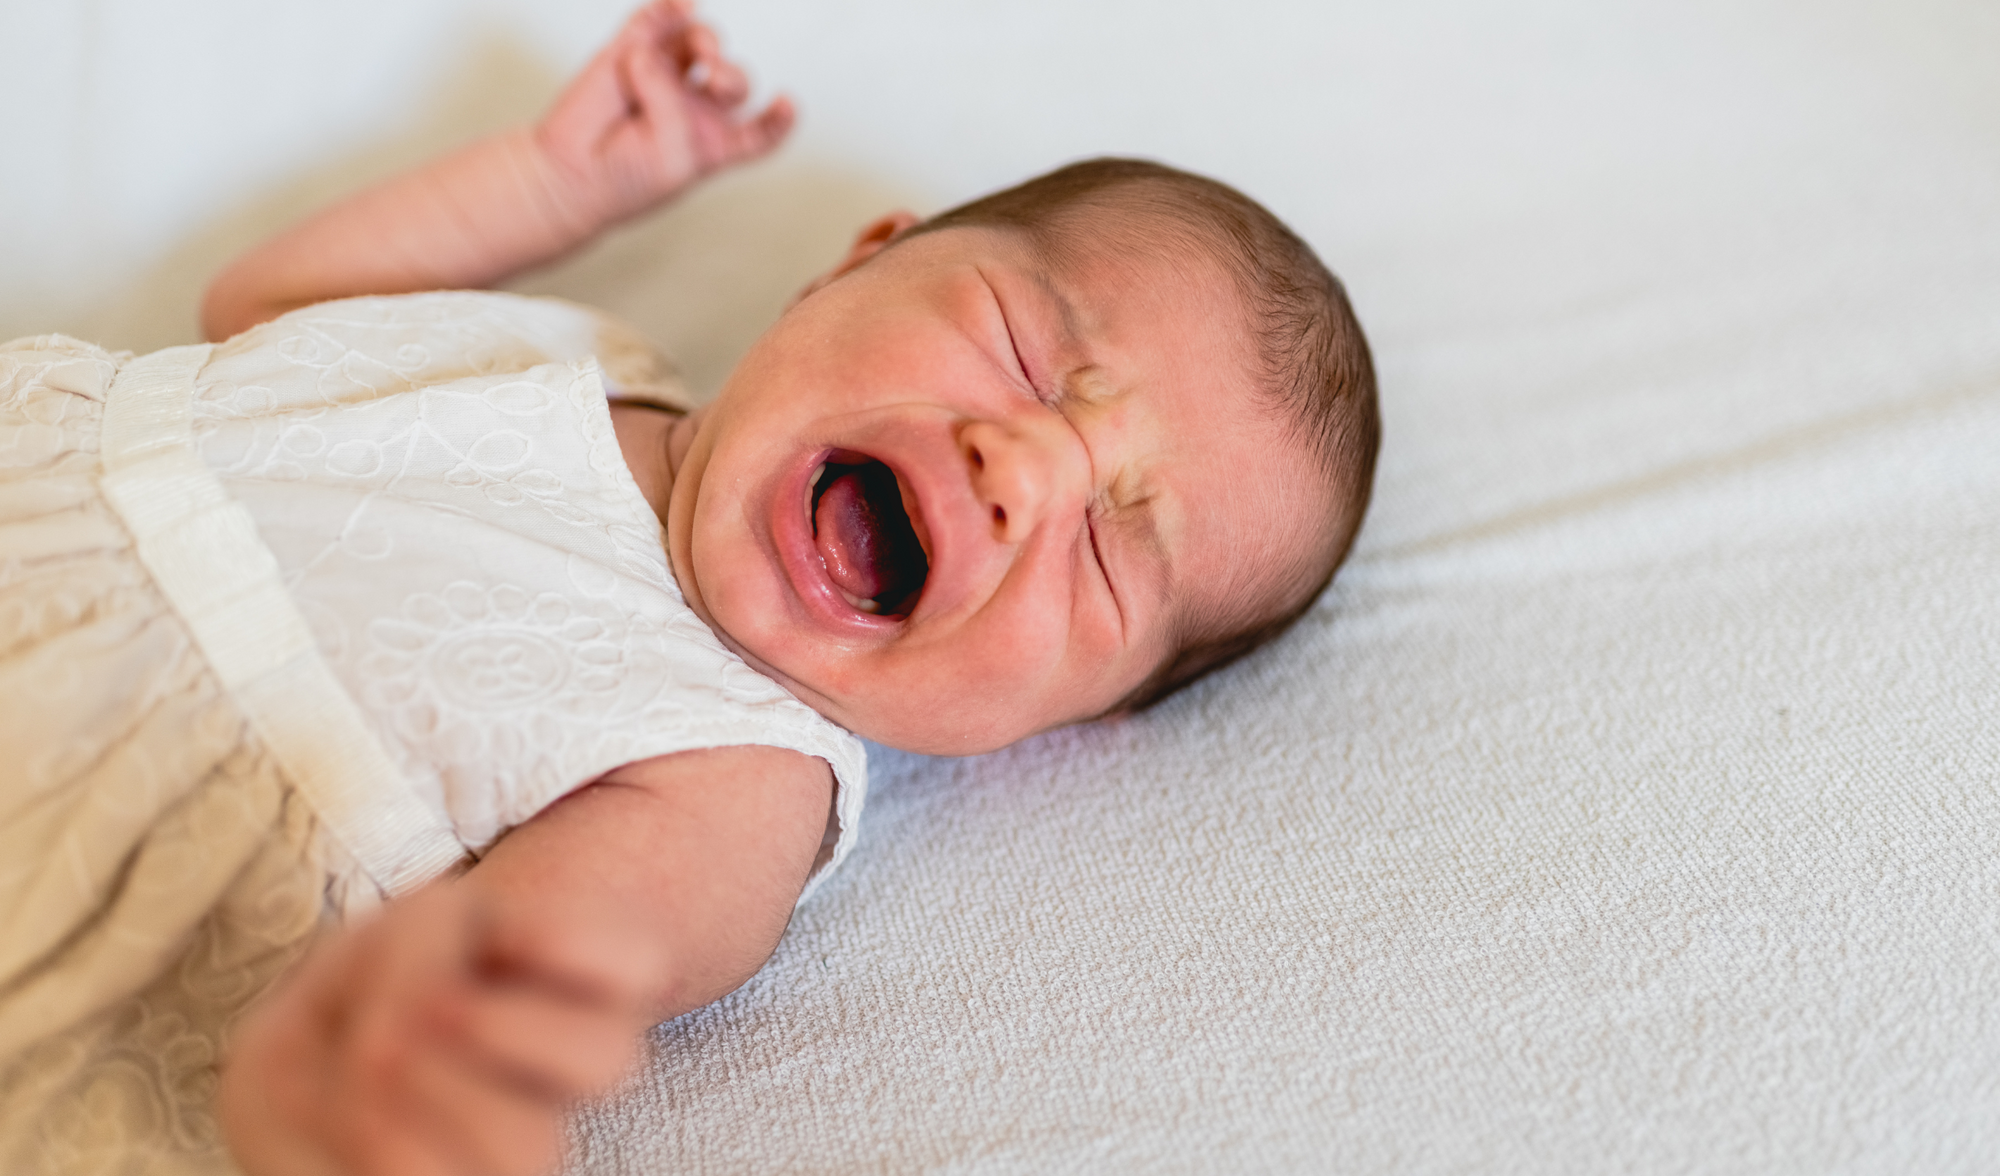 Gas Relief for Newborns: How to Alleviate Discomfort Safely and Effectively